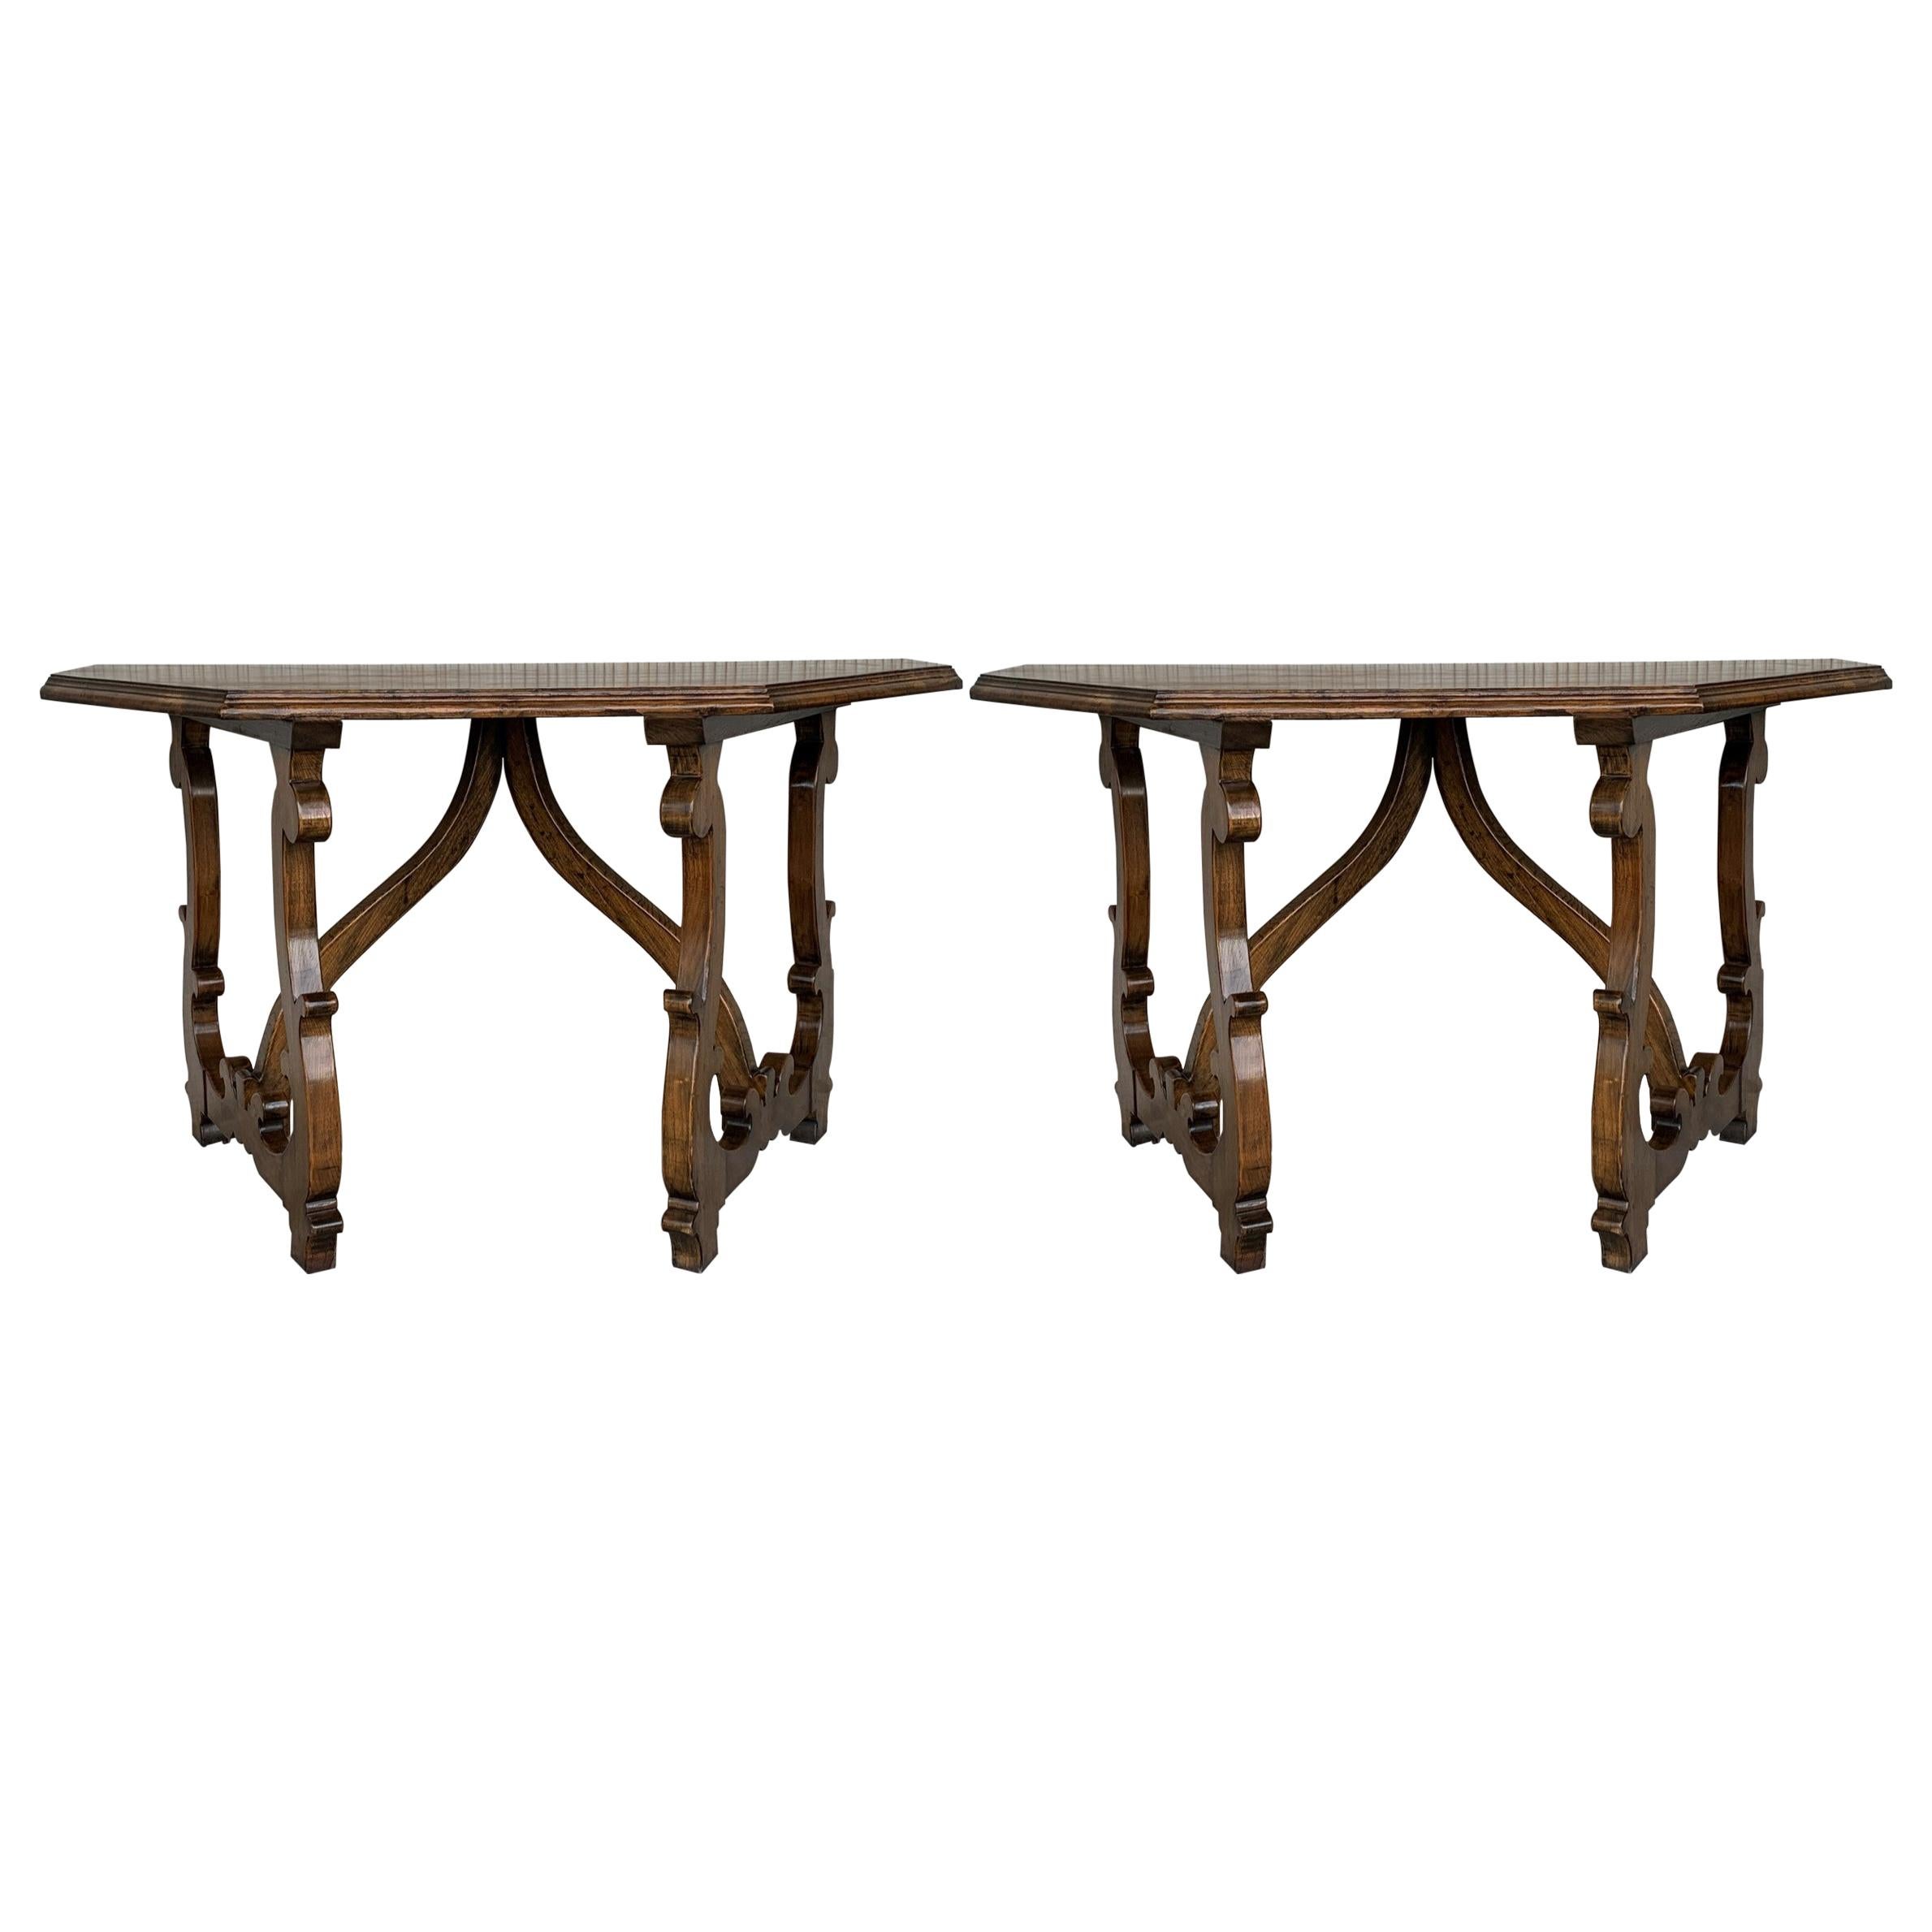 Early 20th Convertible Spanish Walnut Console Tables with Lyre Legs